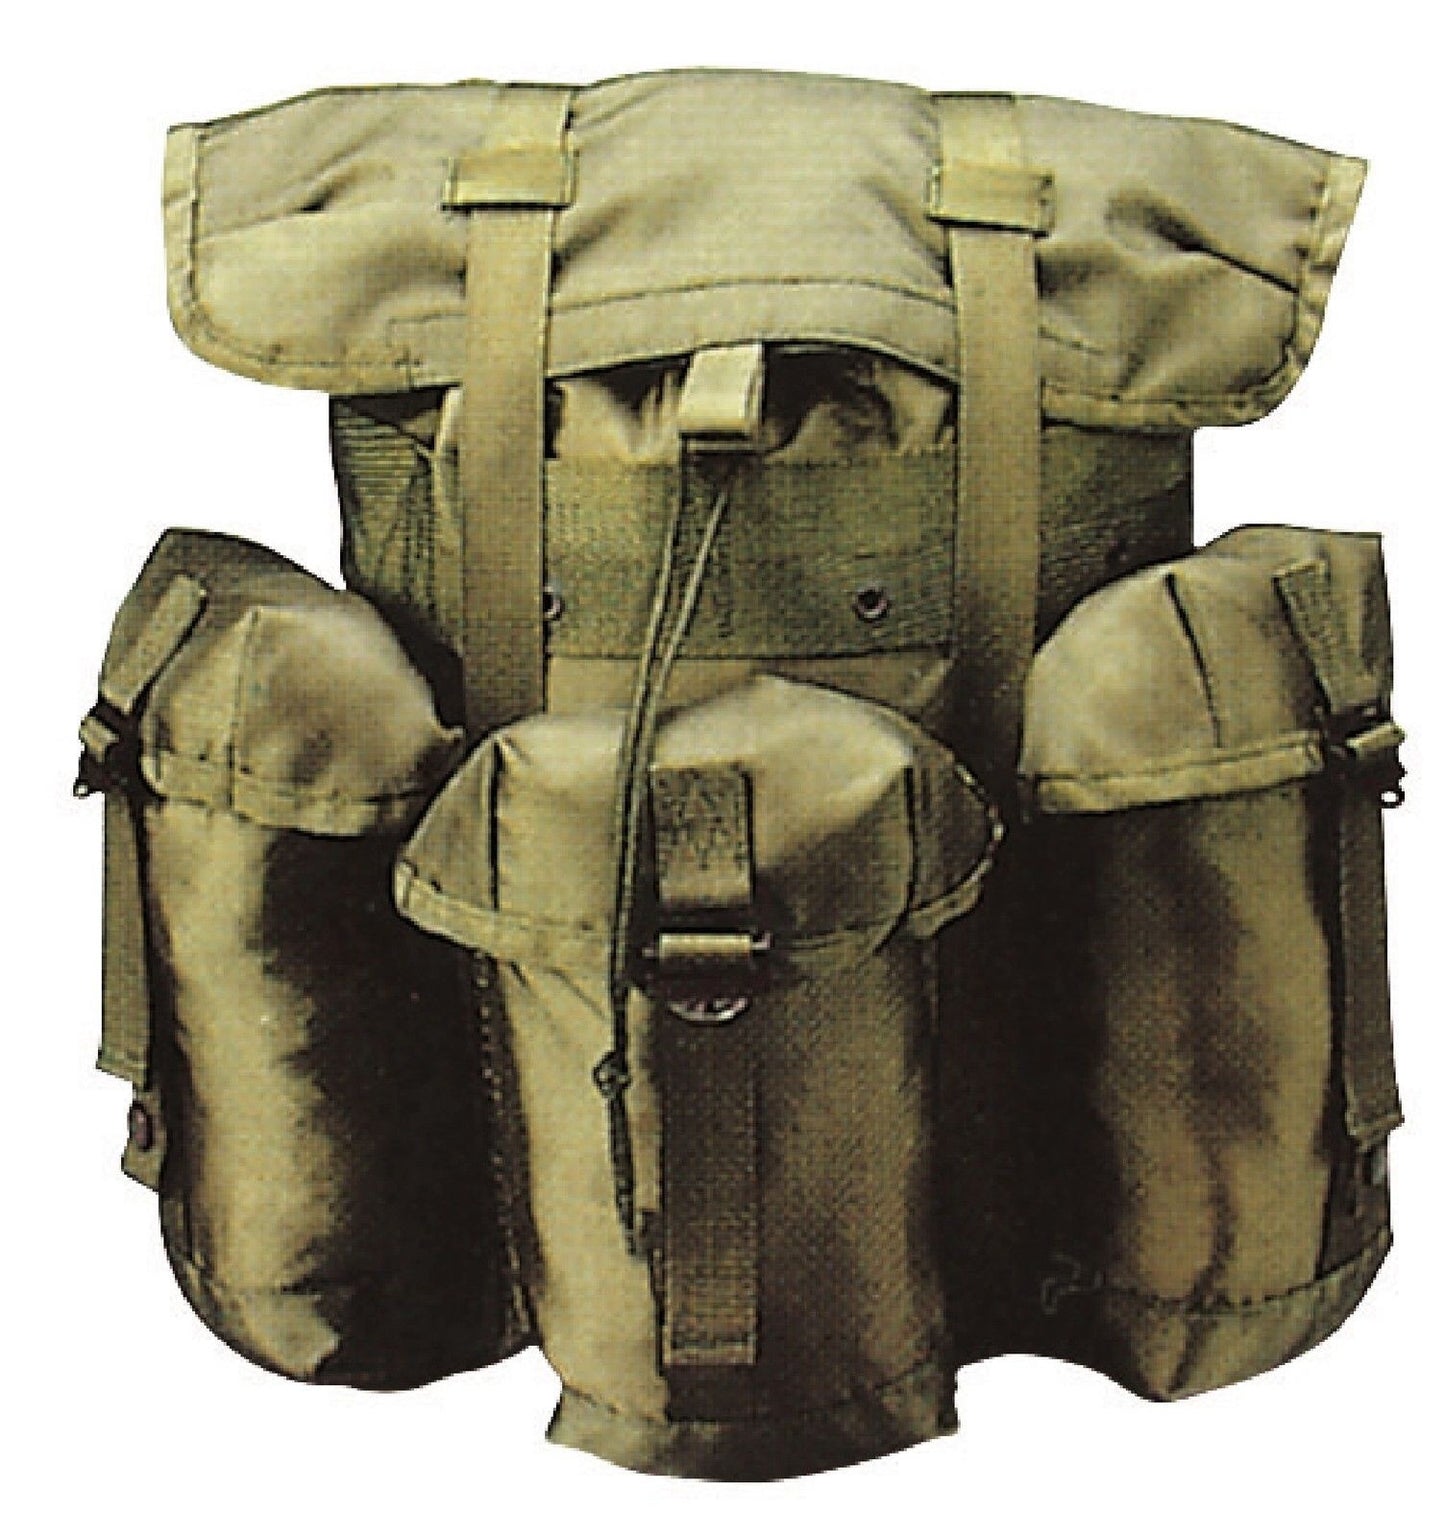 Olive Drab G.I. Style Mini Alice Pack 20L 600D Polyester Tactical Bag